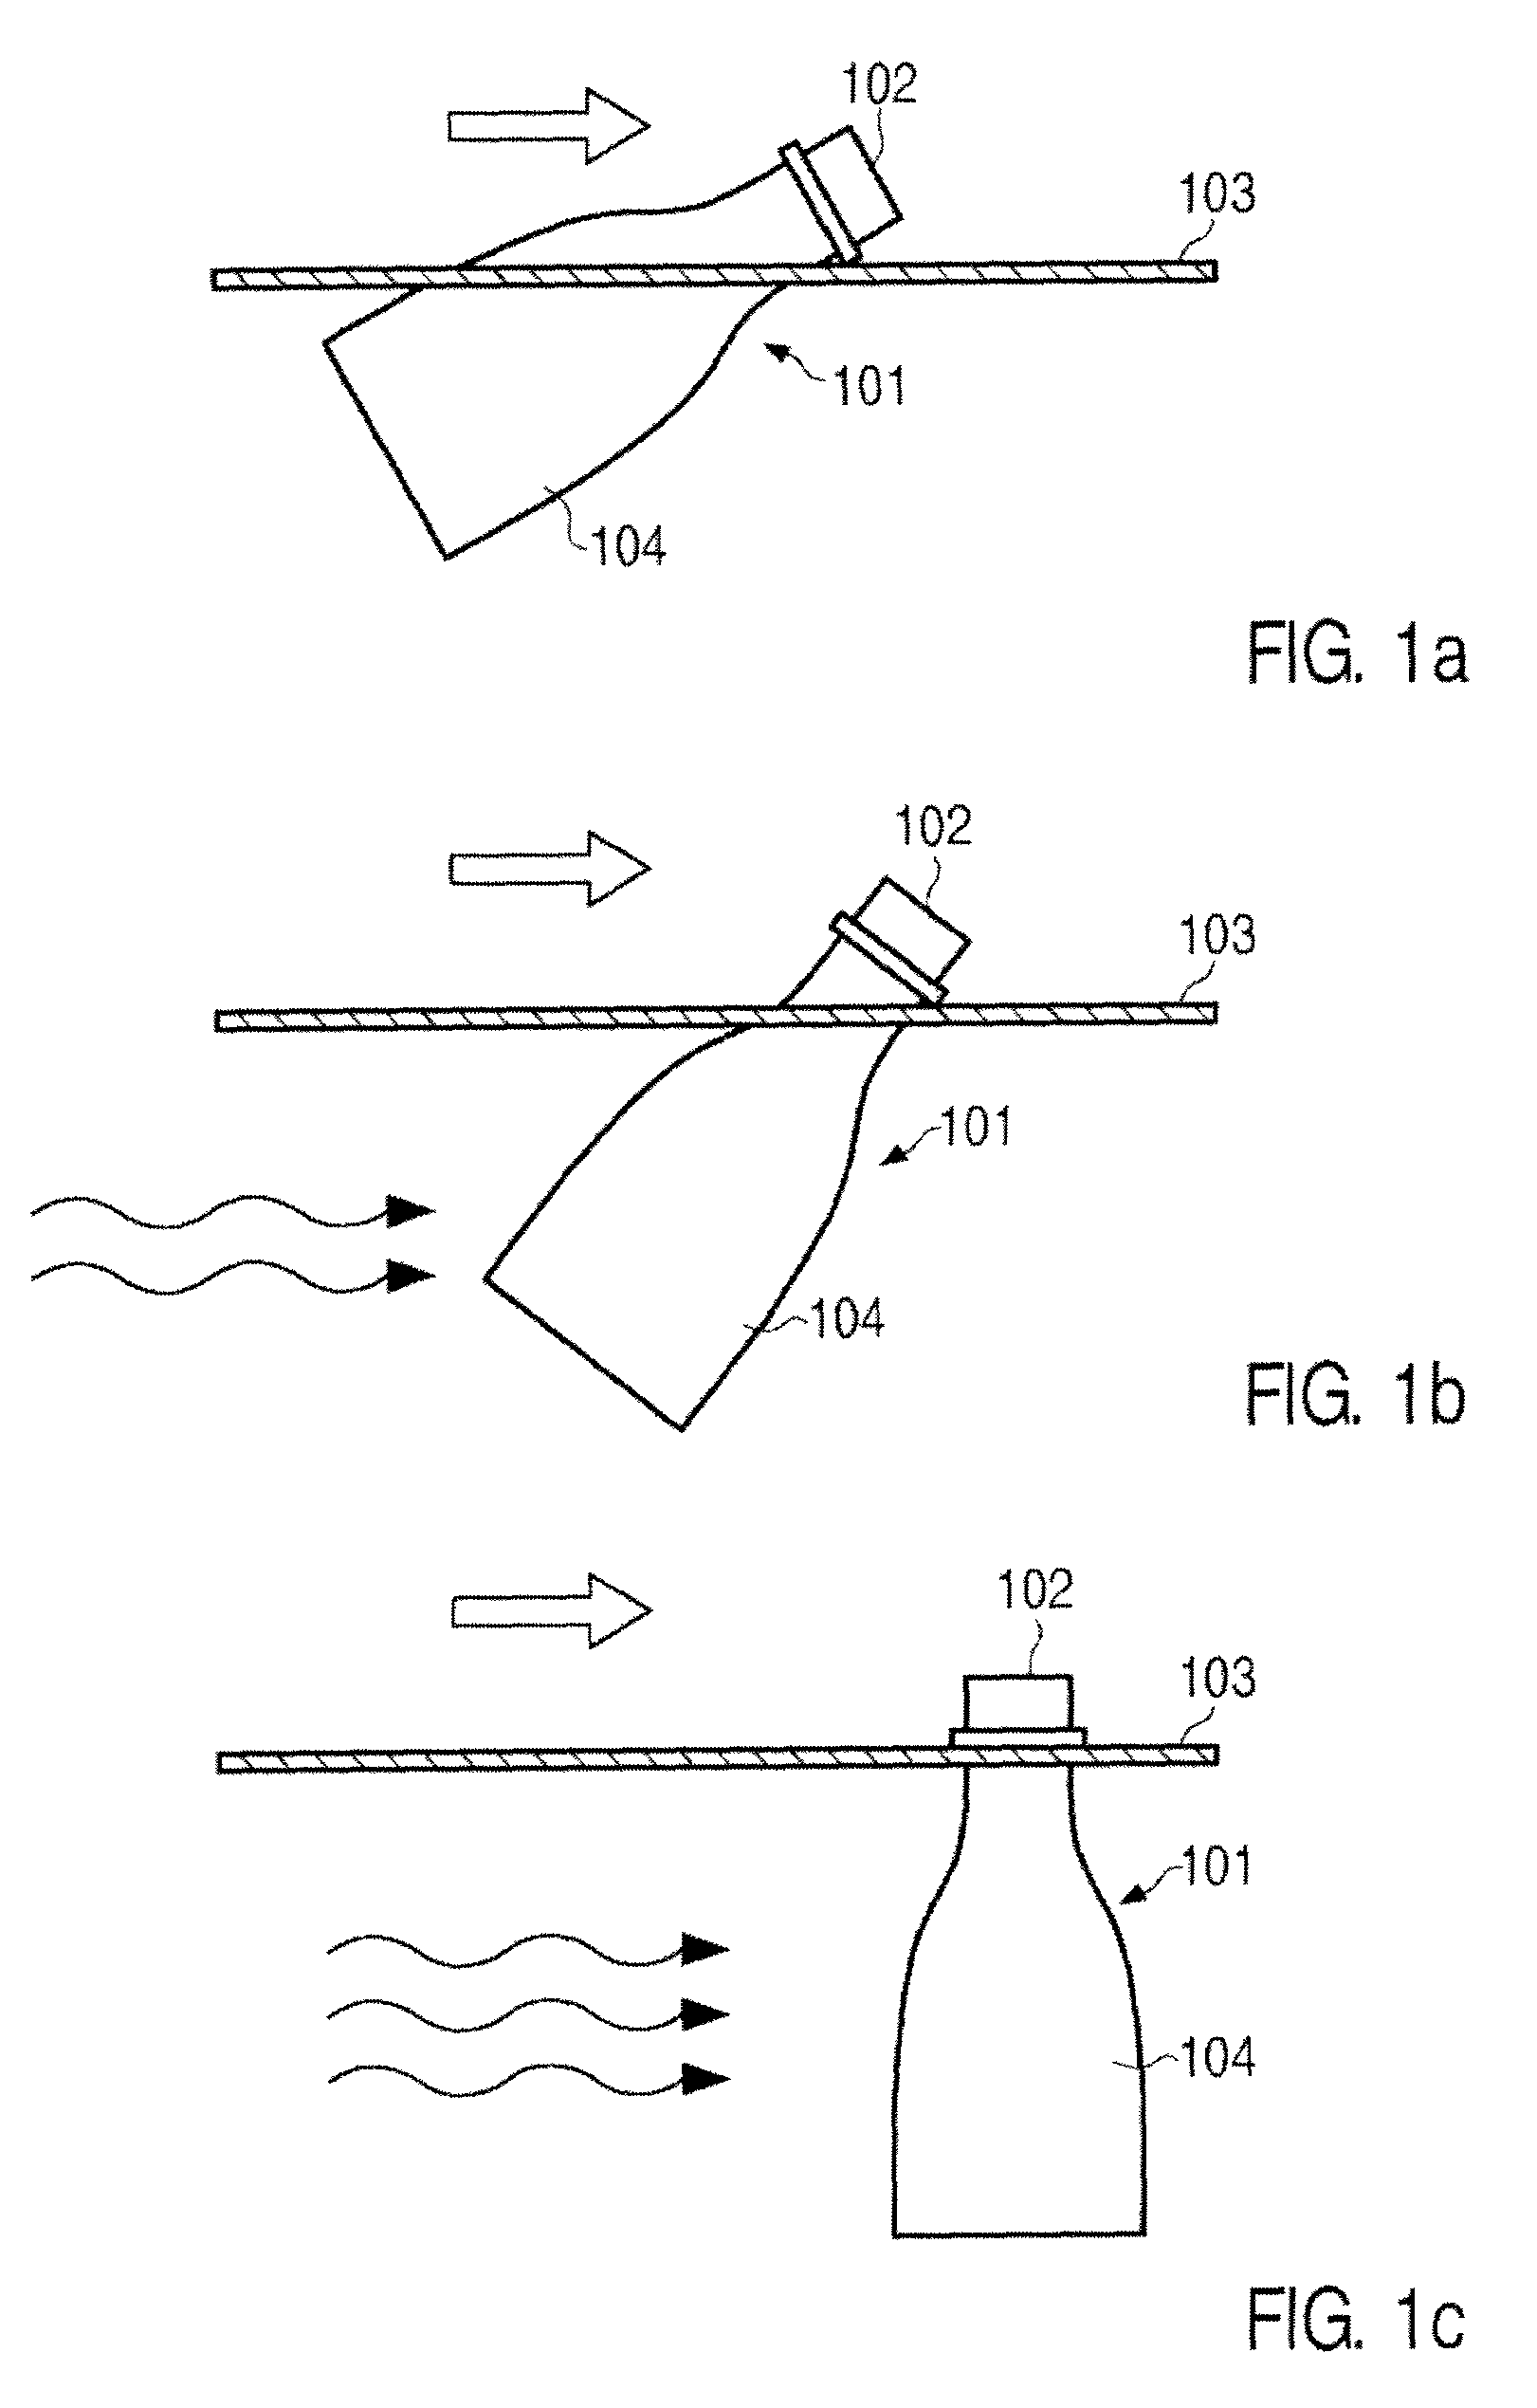 Air conveyor with a device for orienting bottles vertically